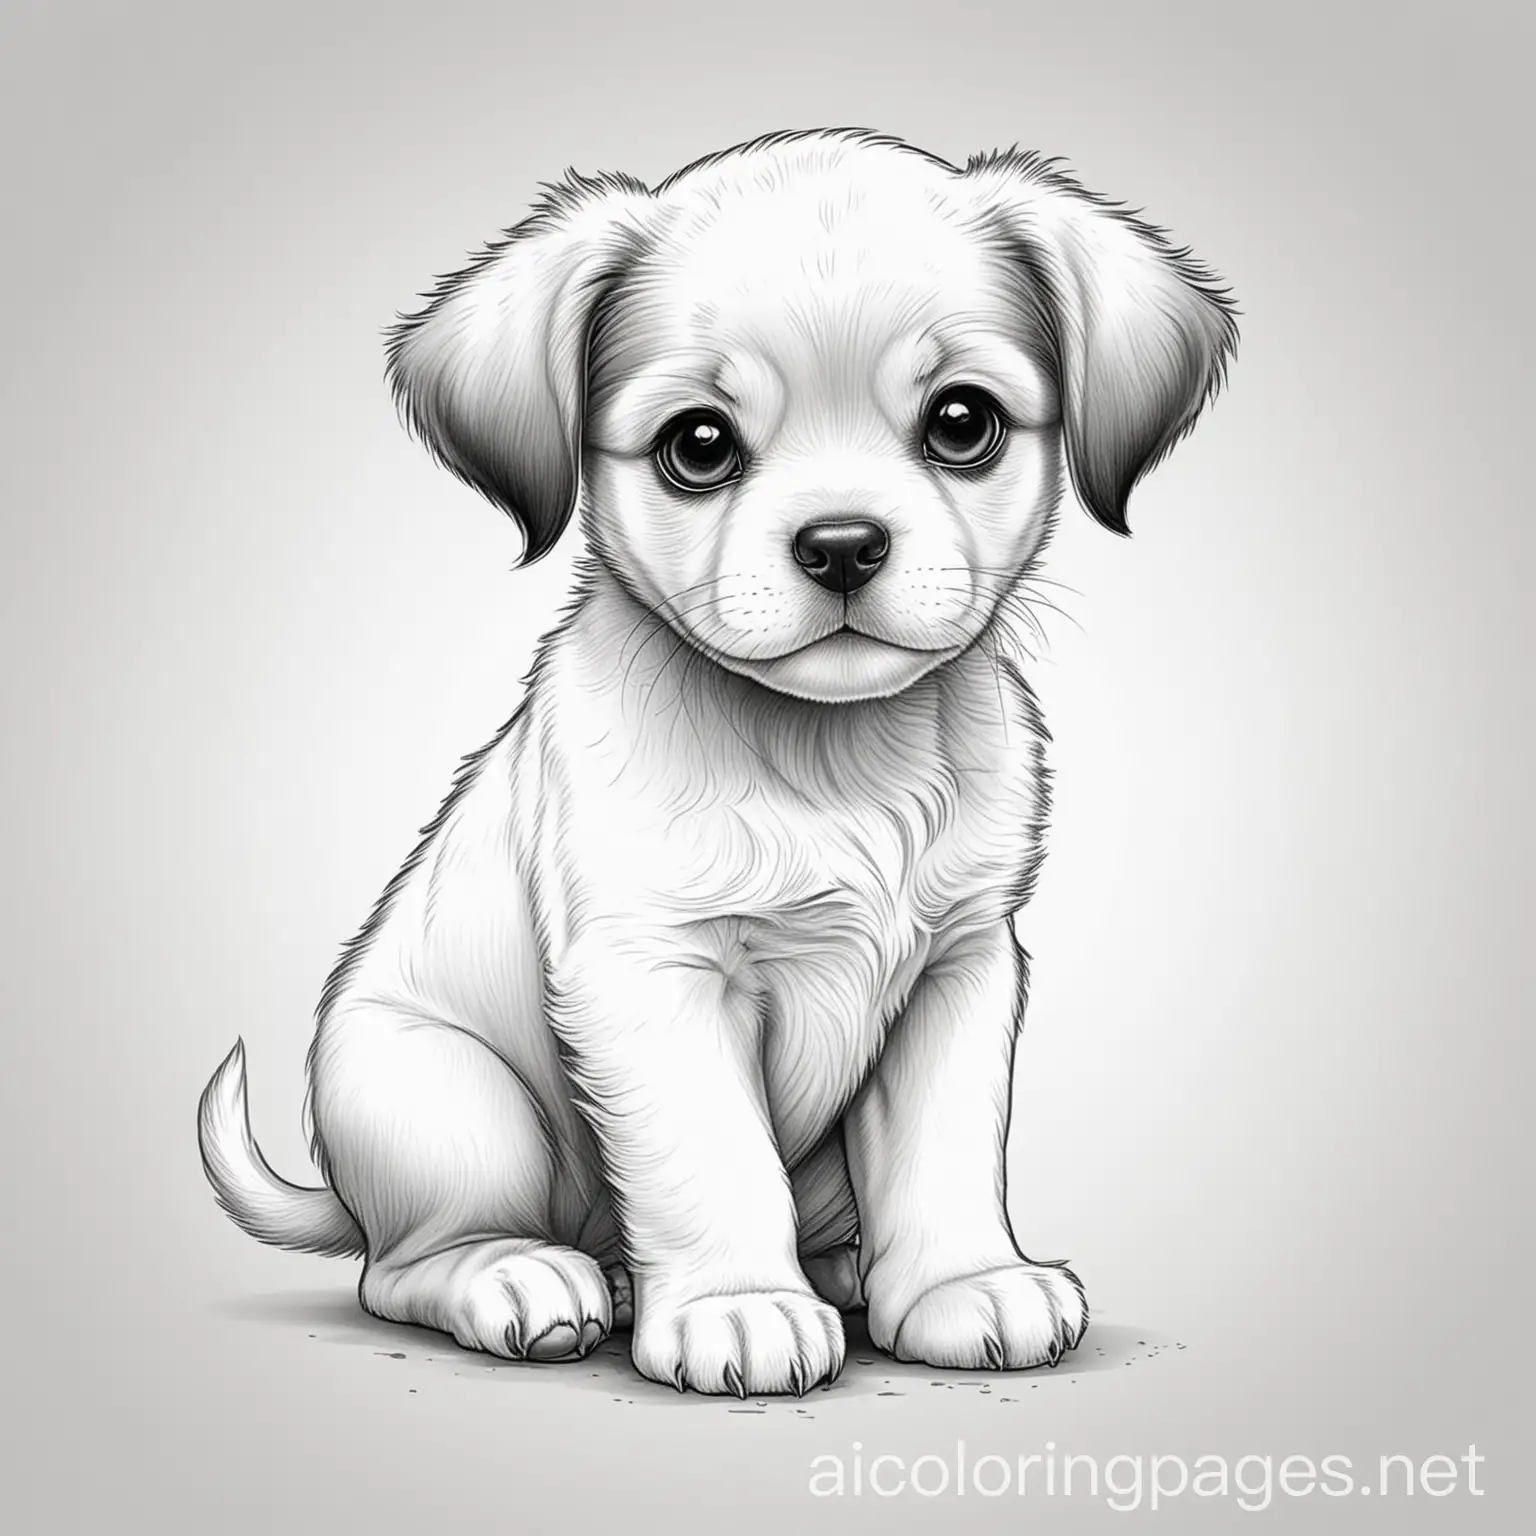 a cute puppy, Coloring Page, black and white, line art, white background, Simplicity, Ample White Space